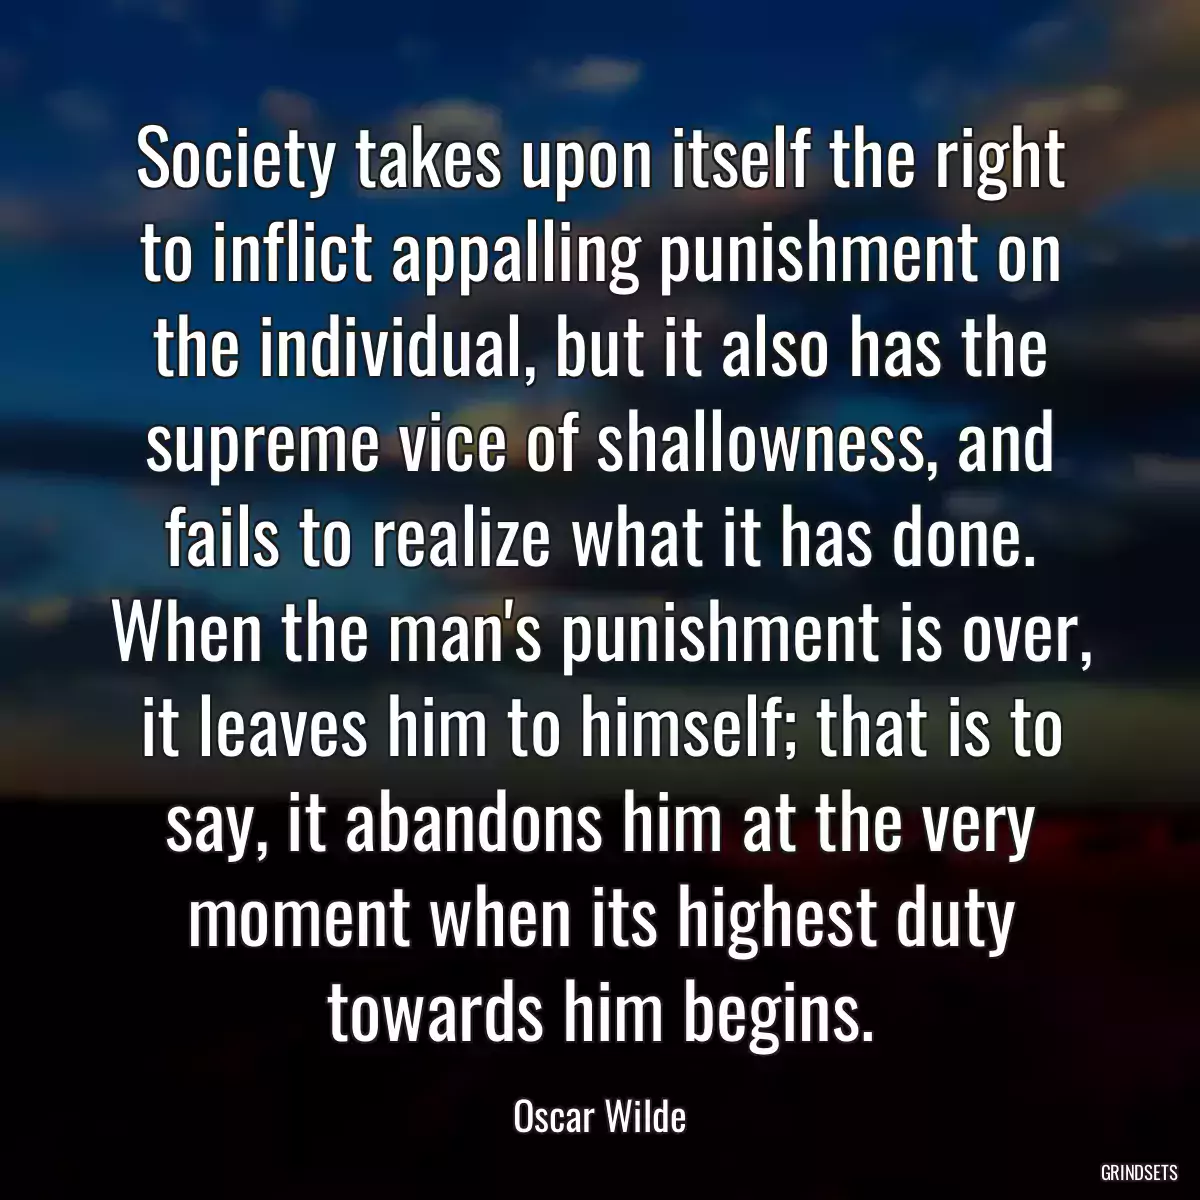 Society takes upon itself the right to inflict appalling punishment on the individual, but it also has the supreme vice of shallowness, and fails to realize what it has done. When the man\'s punishment is over, it leaves him to himself; that is to say, it abandons him at the very moment when its highest duty towards him begins.